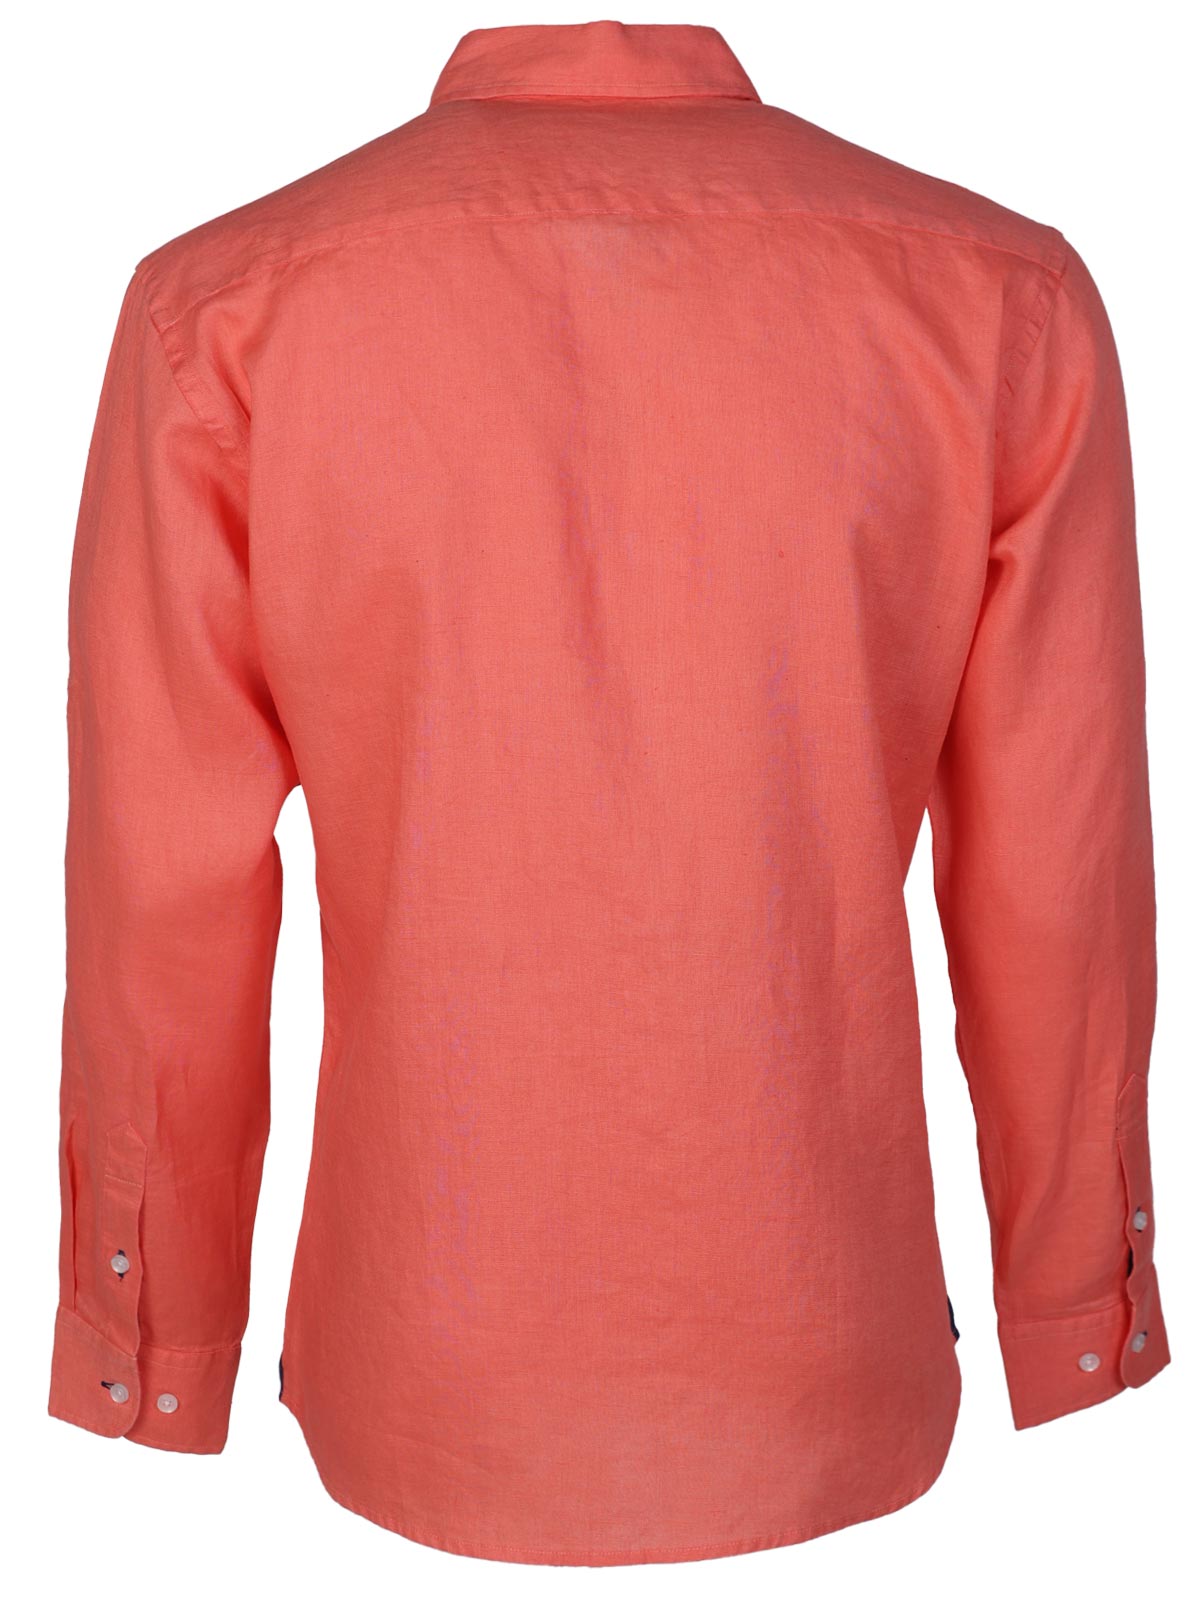 Linen shirt in coral color - 21593 € 55.12 img2